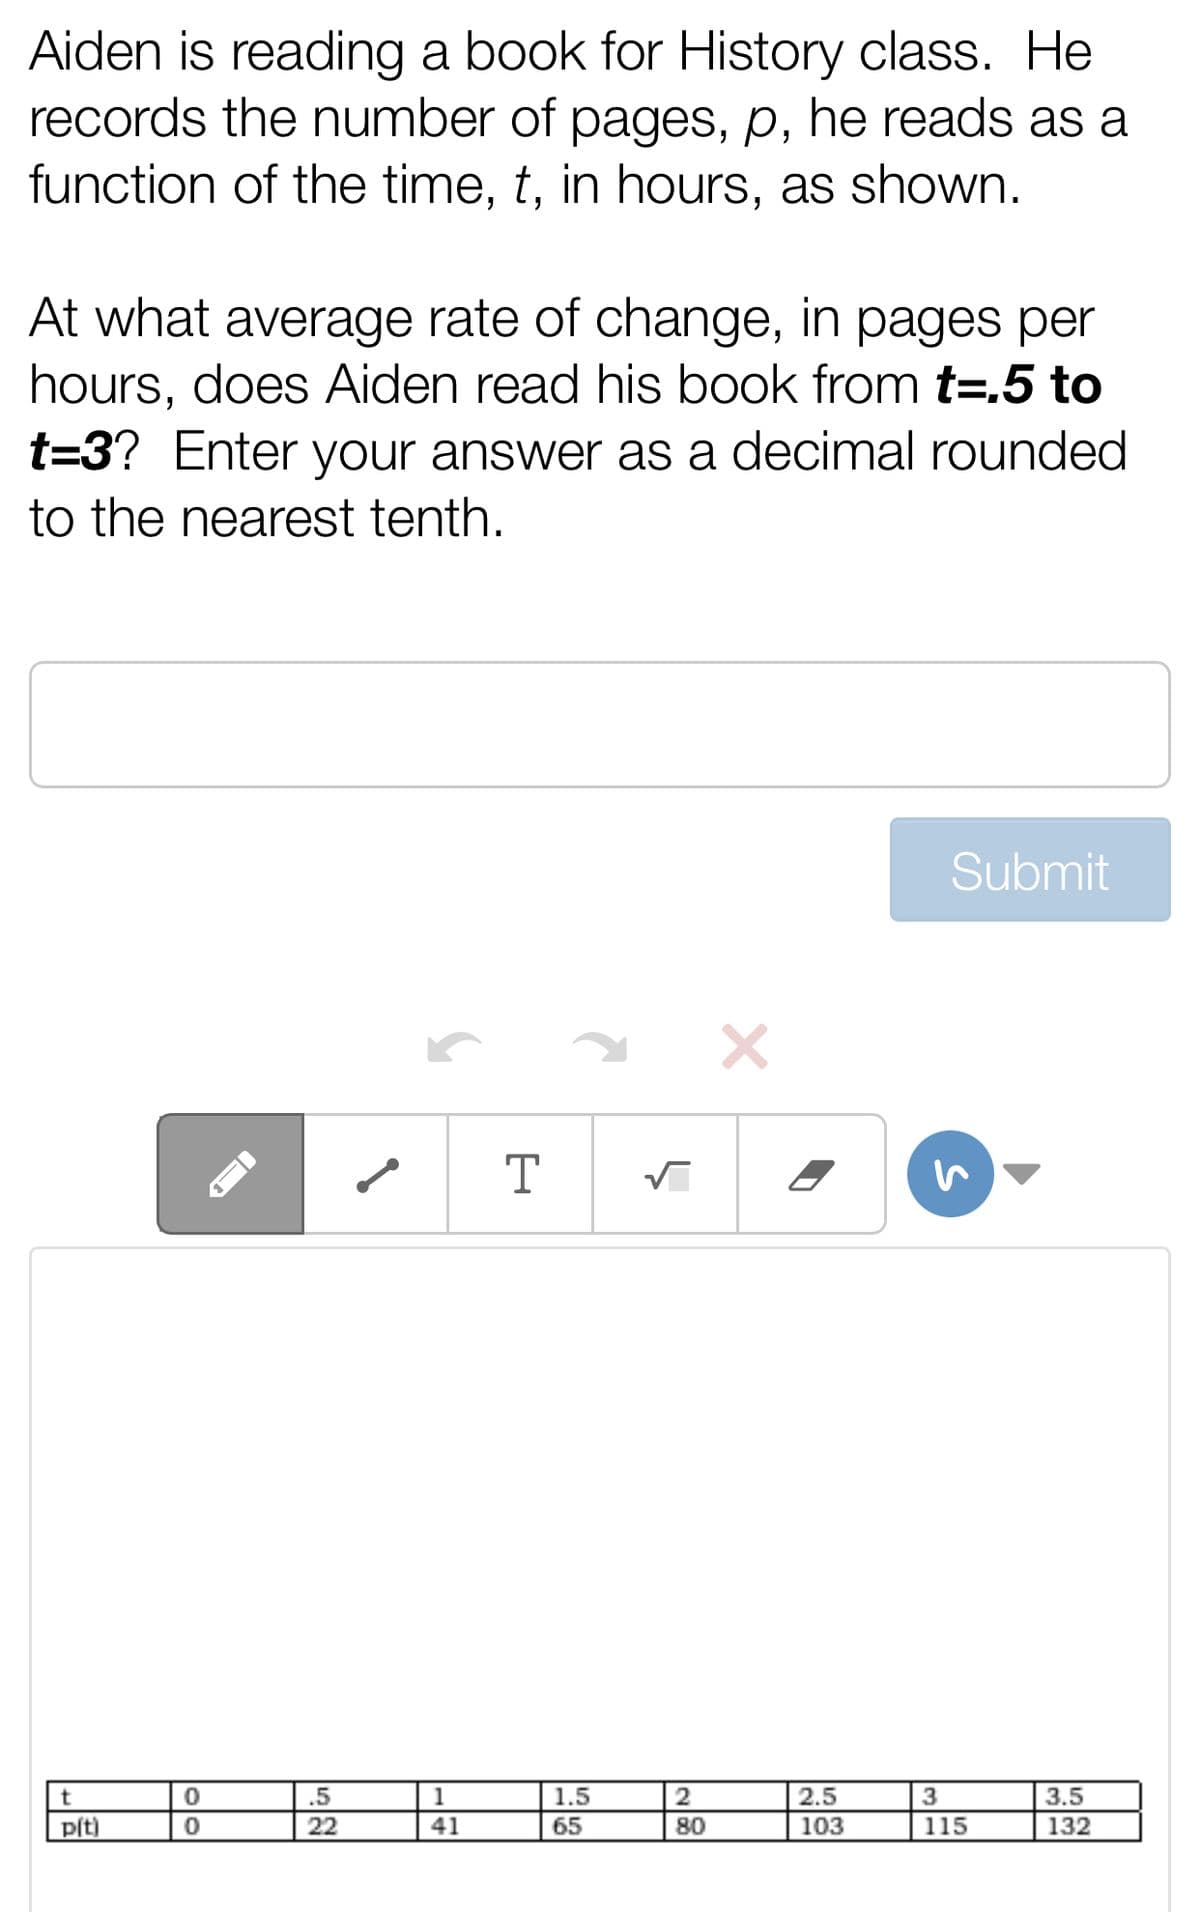 Aiden is reading a book for History class. He
records the number of pages, p, he reads as a
function of the time, t, in hours, as shown.
At what average rate of change, in pages per
hours, does Aiden read his book from t=.5 to
t=3? Enter your answer as a decimal rounded
to the nearest tenth.
t
p(t)
0
0
.5
22
1
41
T
1.5
65
✓
2
80
×
2.5
103
Submit
3
115
3.5
132